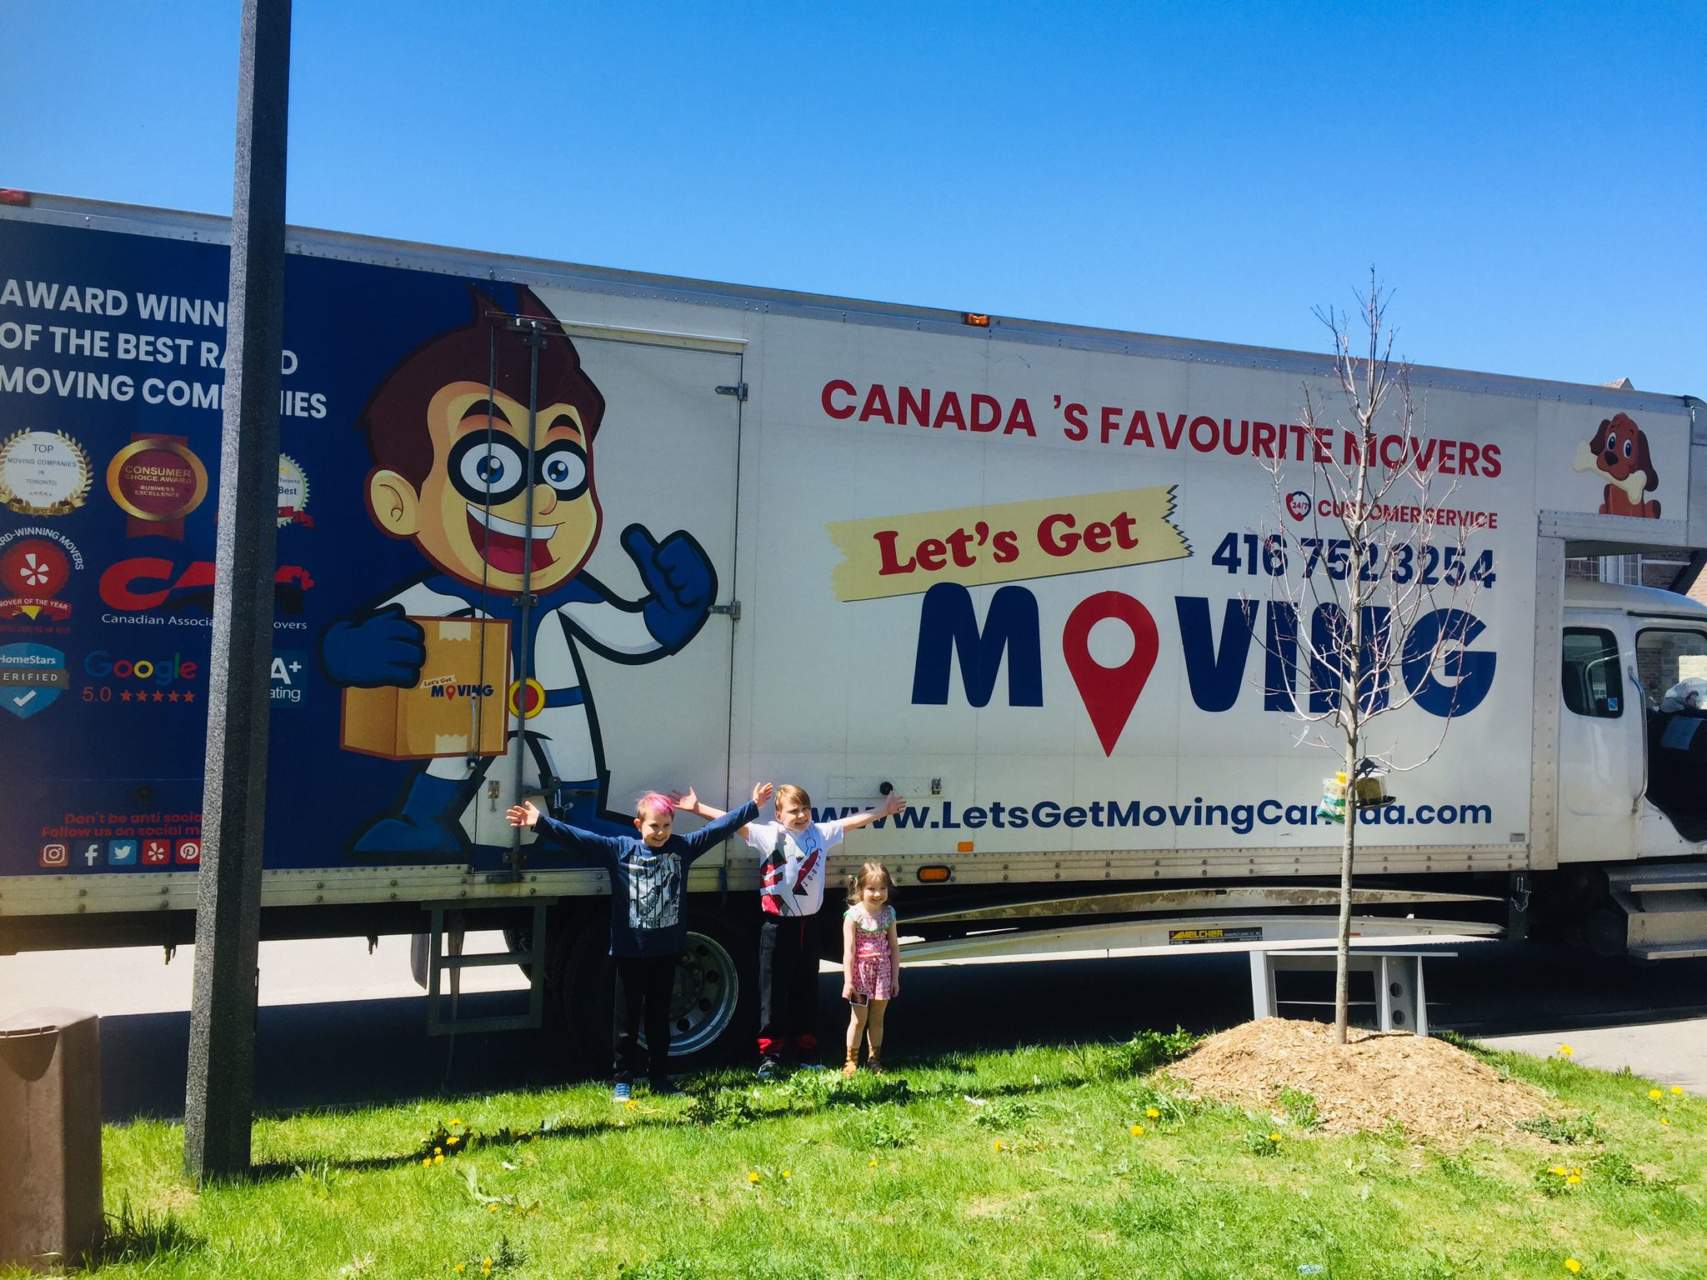 Best Toronto Movers, Moving Services Company - Let’s Get Moving